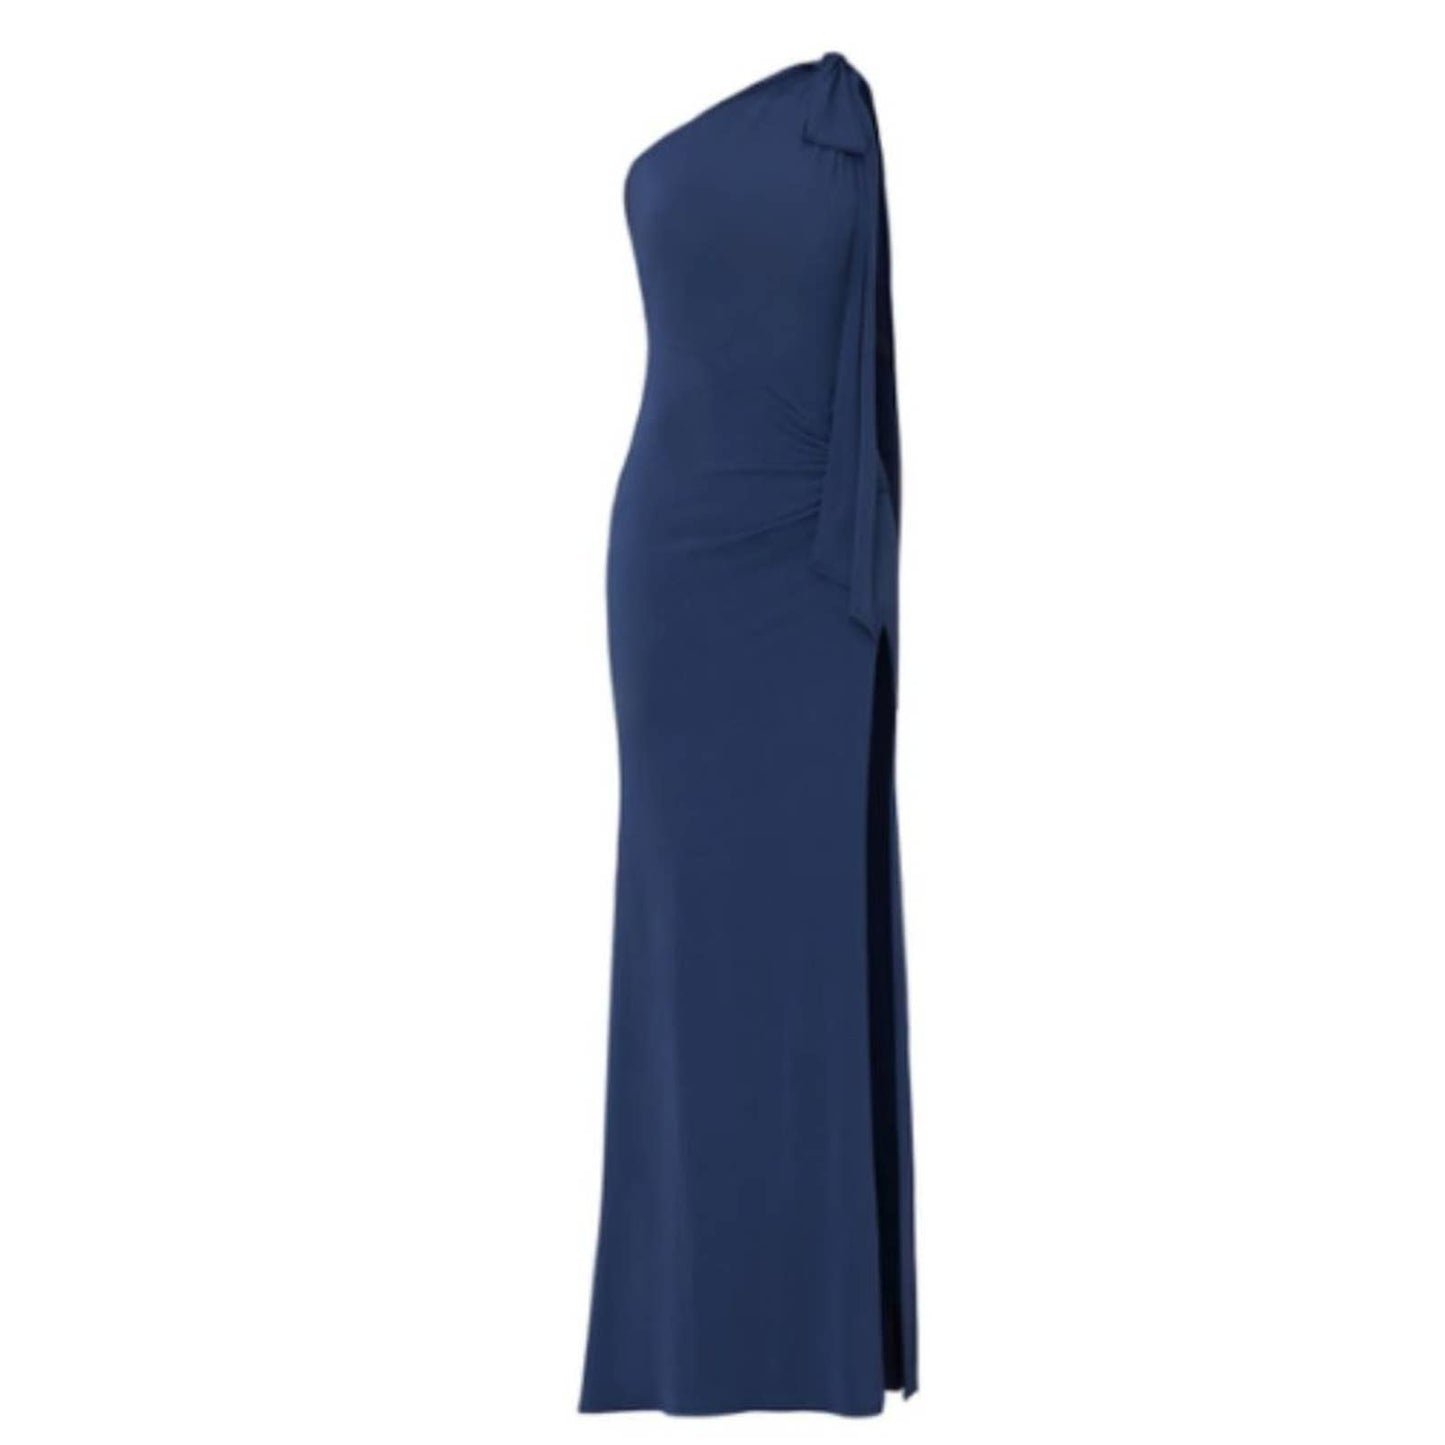 Katie May Attention Seeker Gown in Blue Size Small